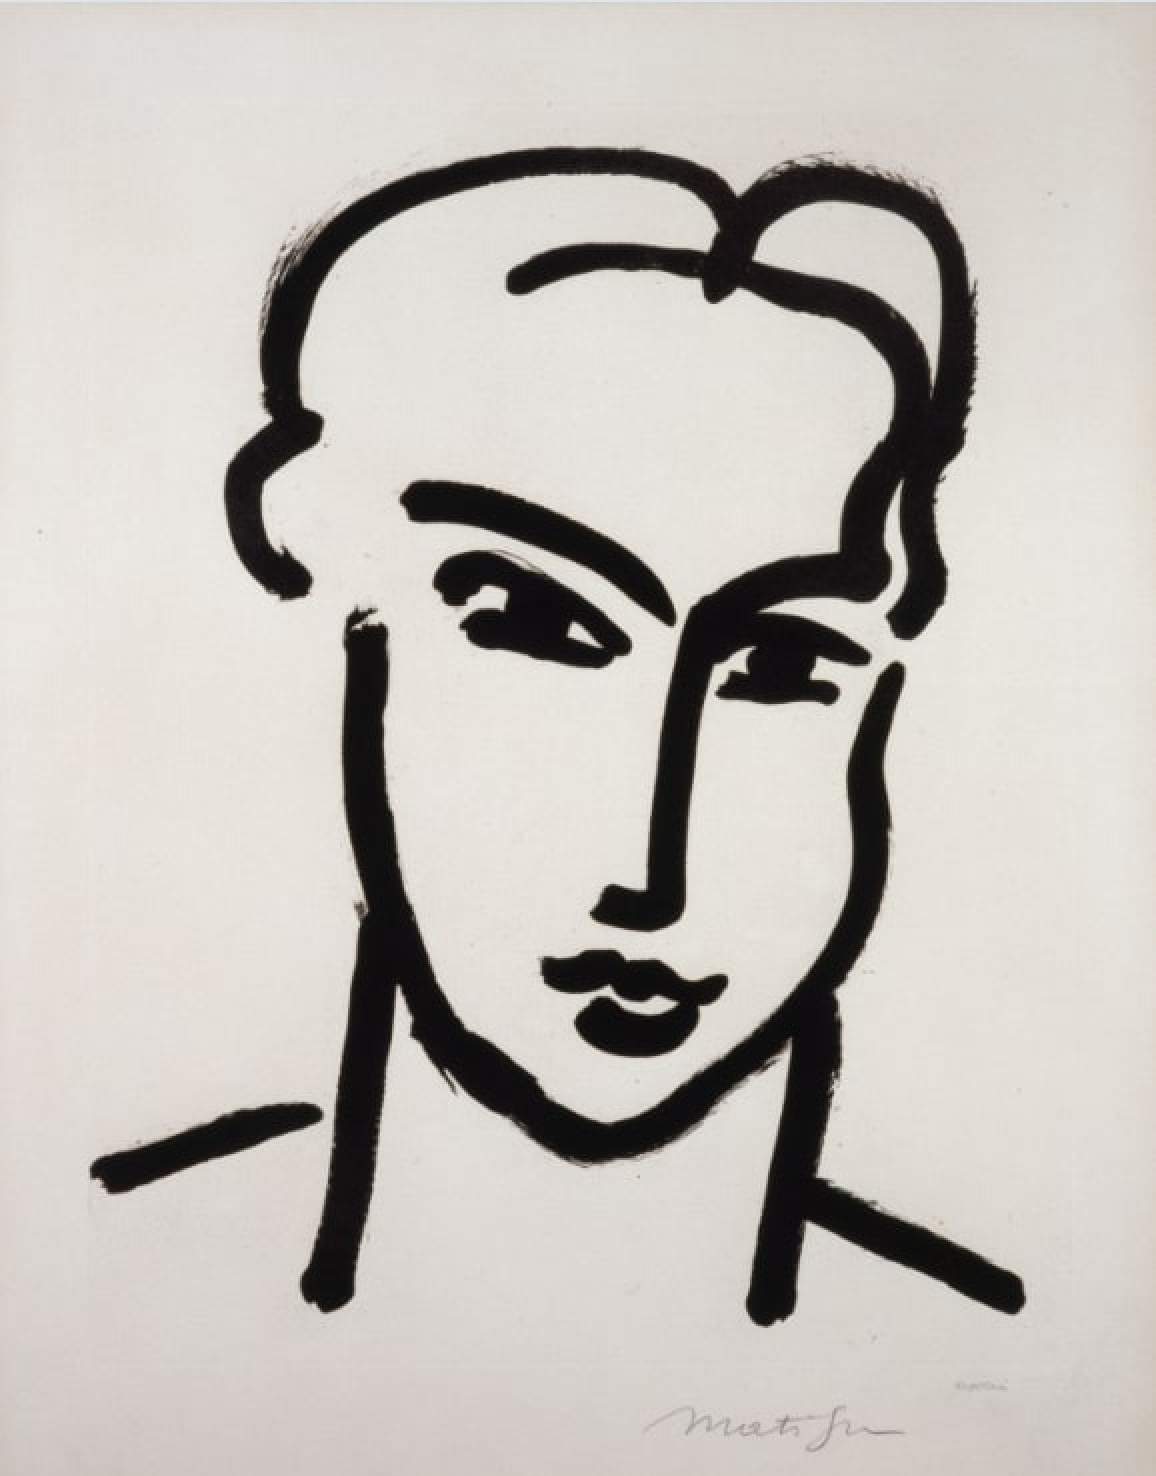 Grande tête de Katia (circa 1950) by Henri Matisse, one of the works the Matisse Museum in France had agreed to loan to the UCCA Center for Contemporary Art in Beijing. Photo: Succession H Matisse 2021